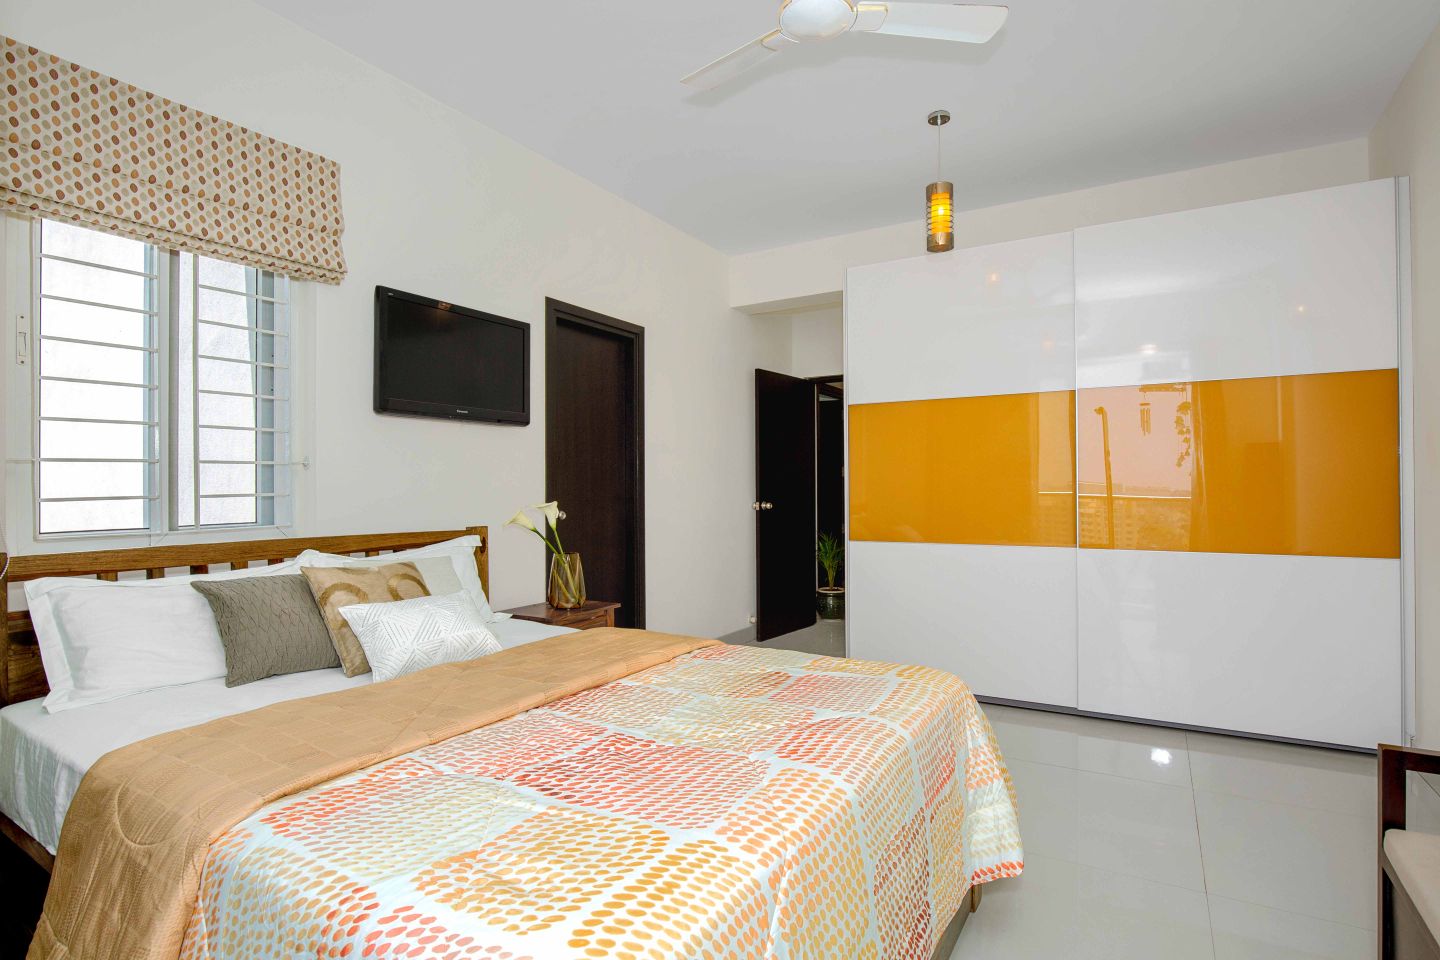 Guest Room Design With White And Yellow Glossy Sliding Wardrobe - Livspace